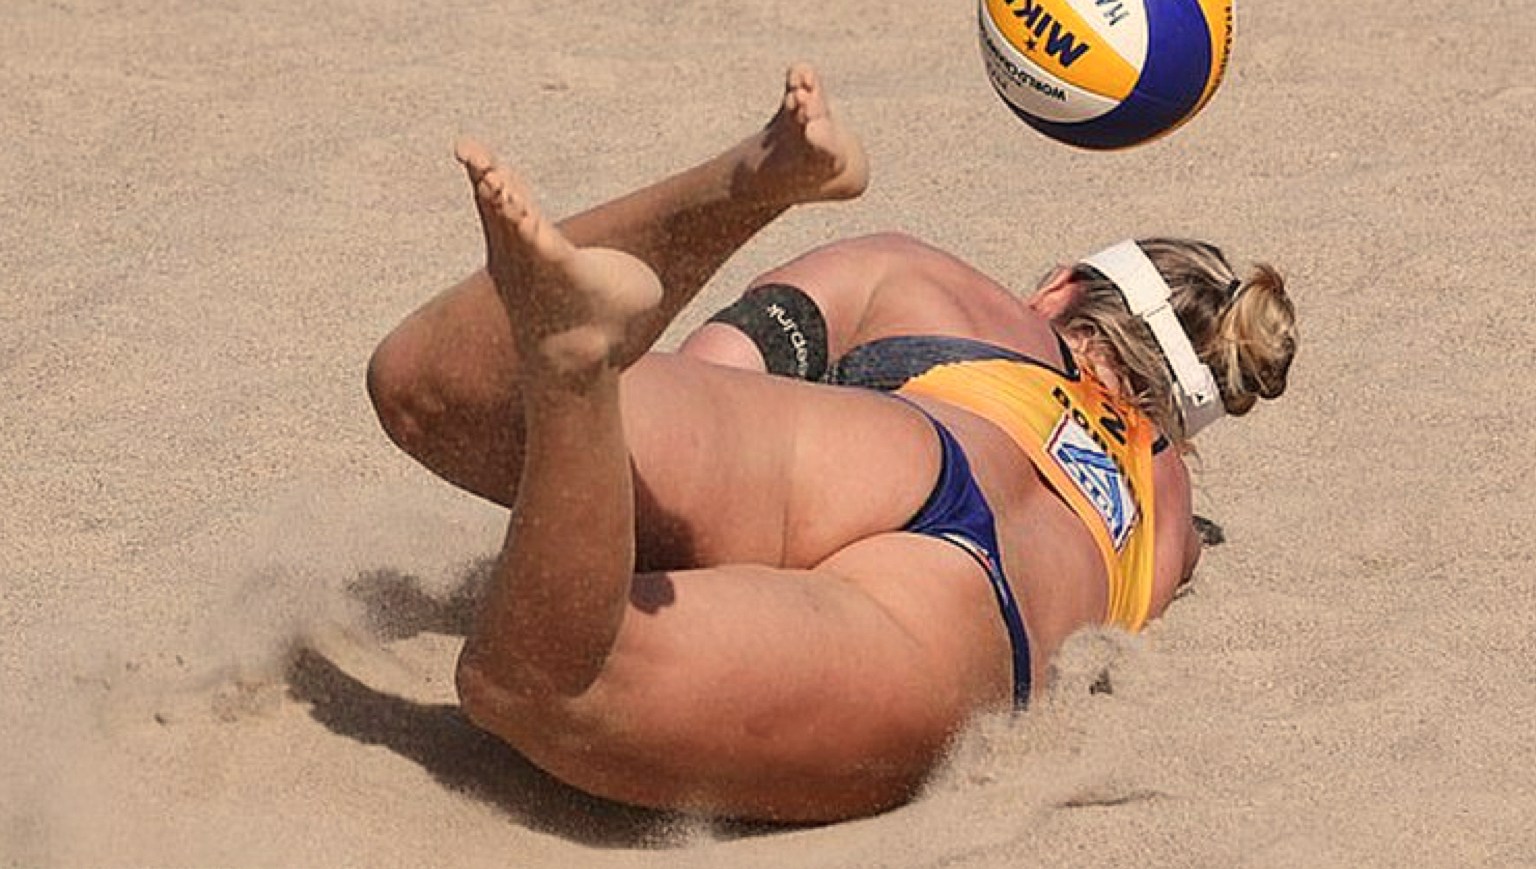 Beach Volleyball Tits - Fucked a Volley Ball Player on the Beach (64 photos) - motherless porn pics